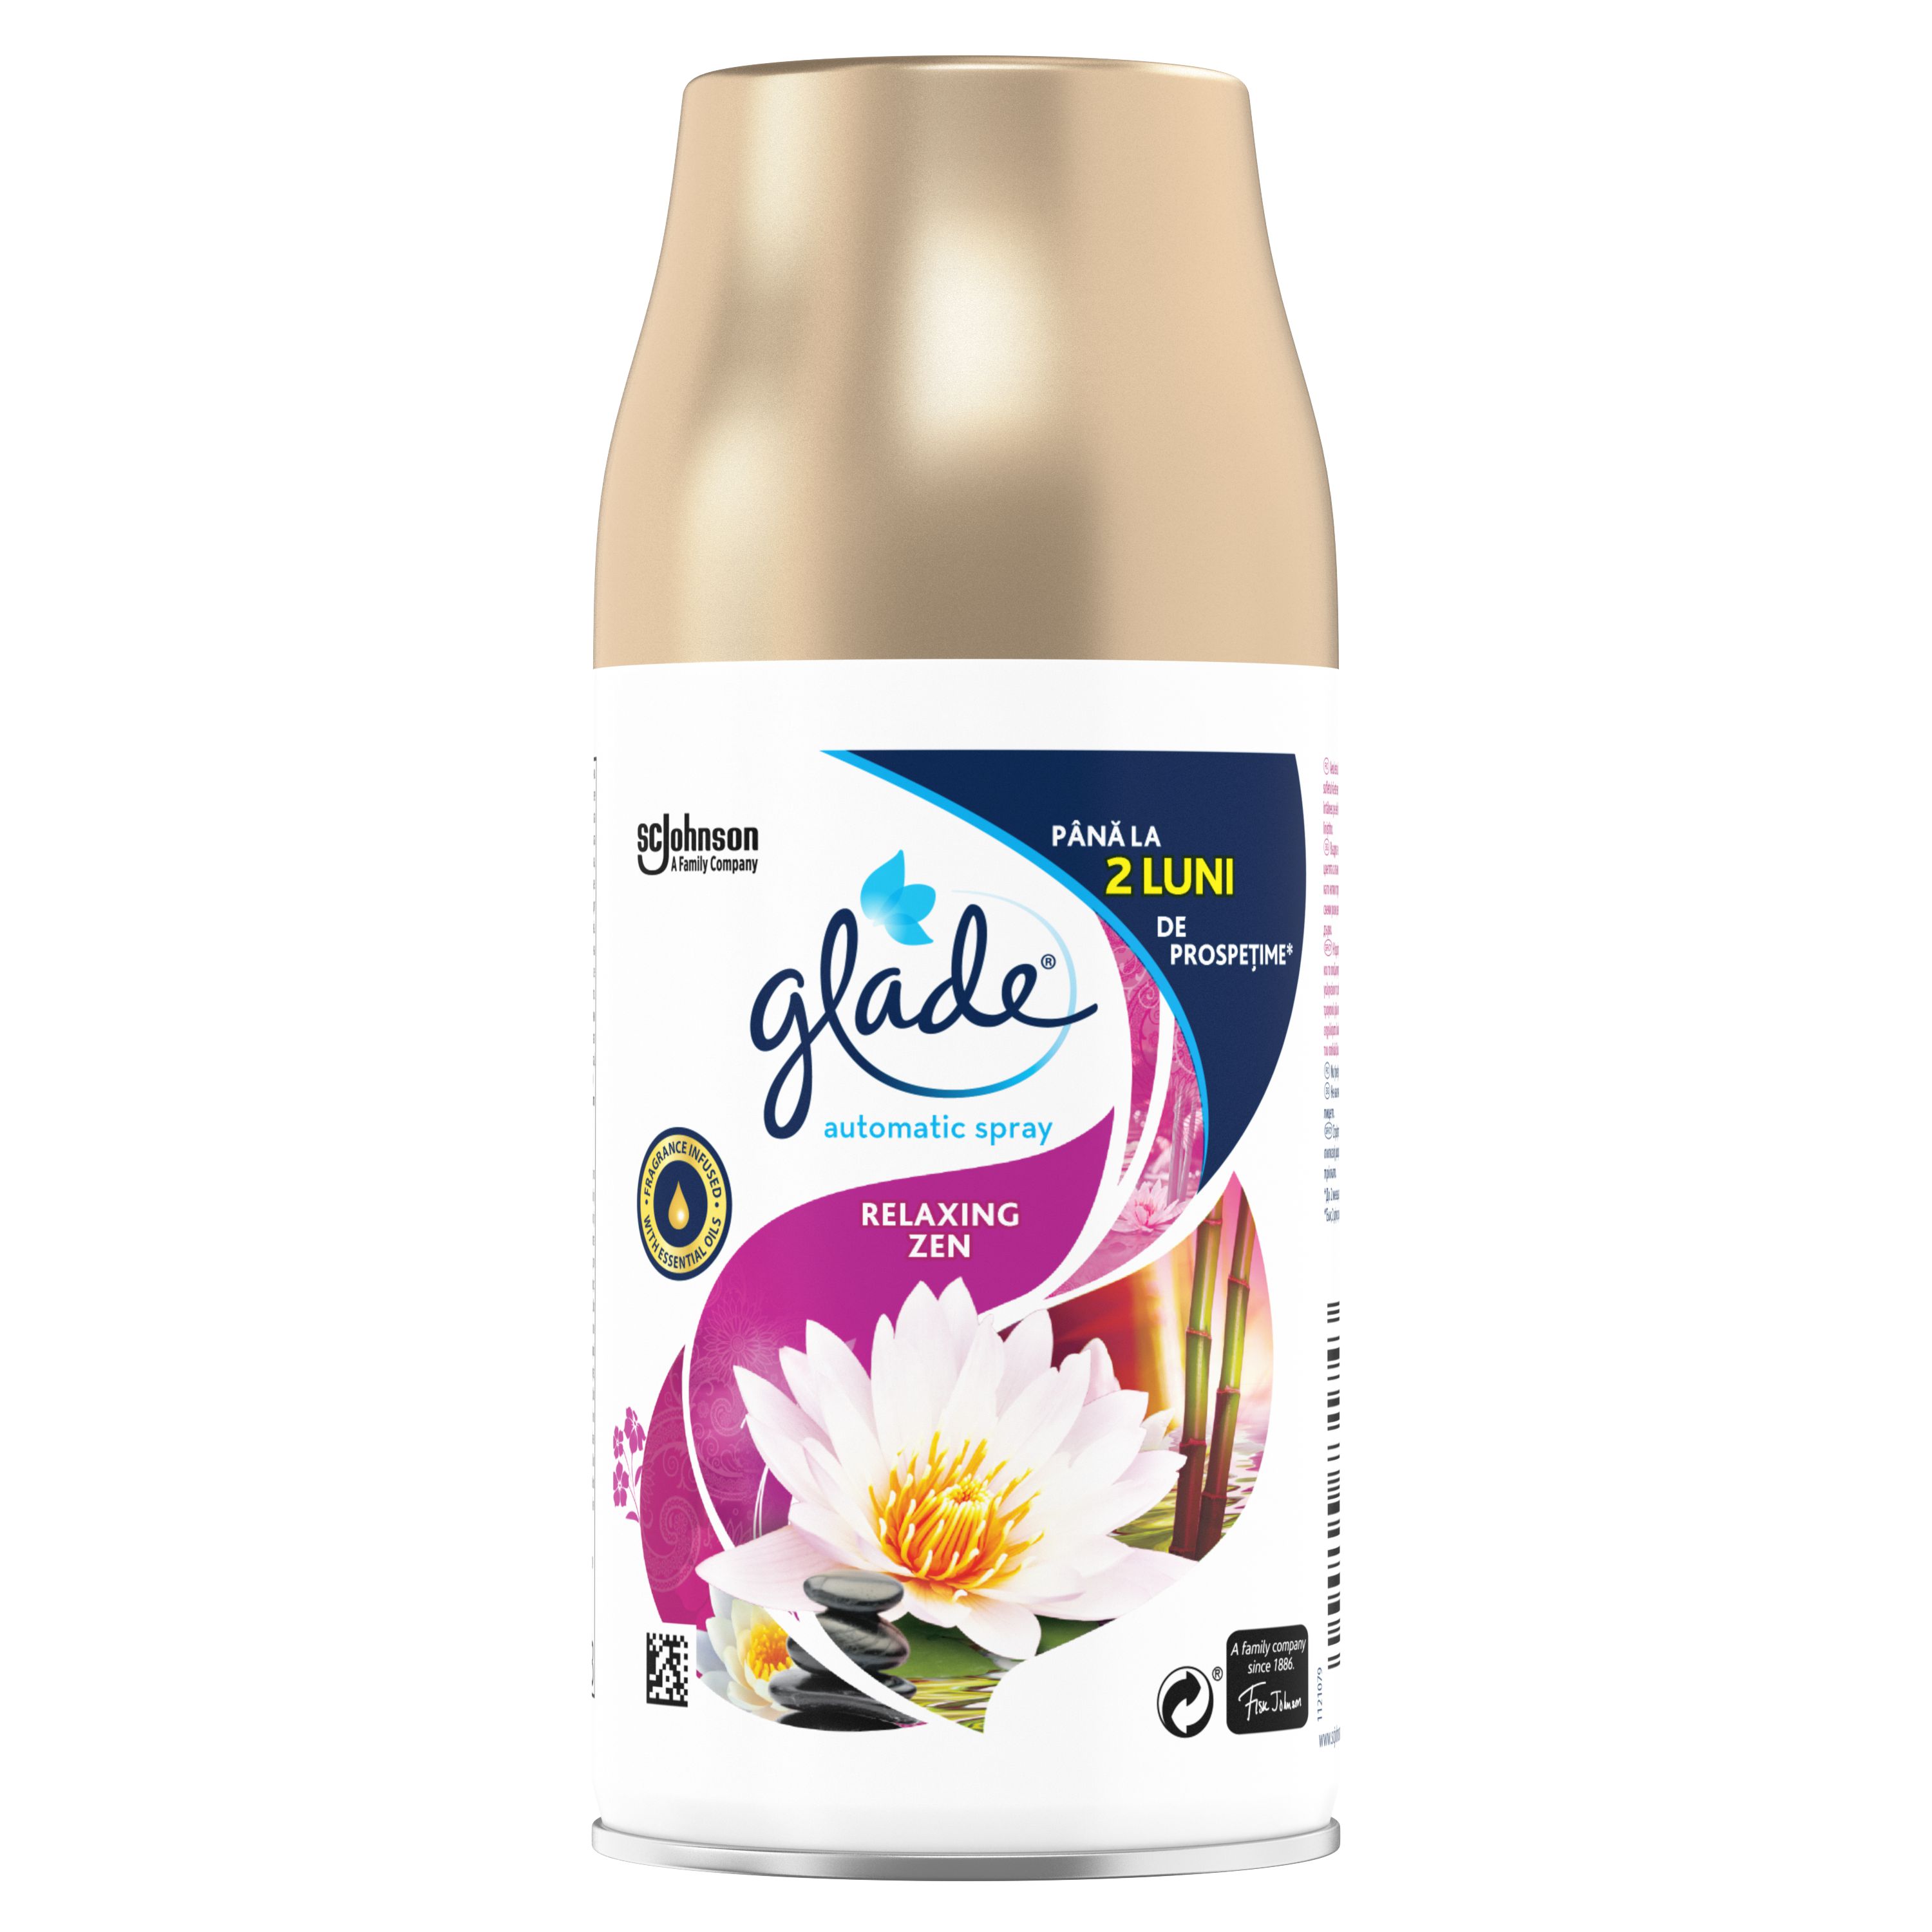 Glade® Automatic Spray Relaxing Zen